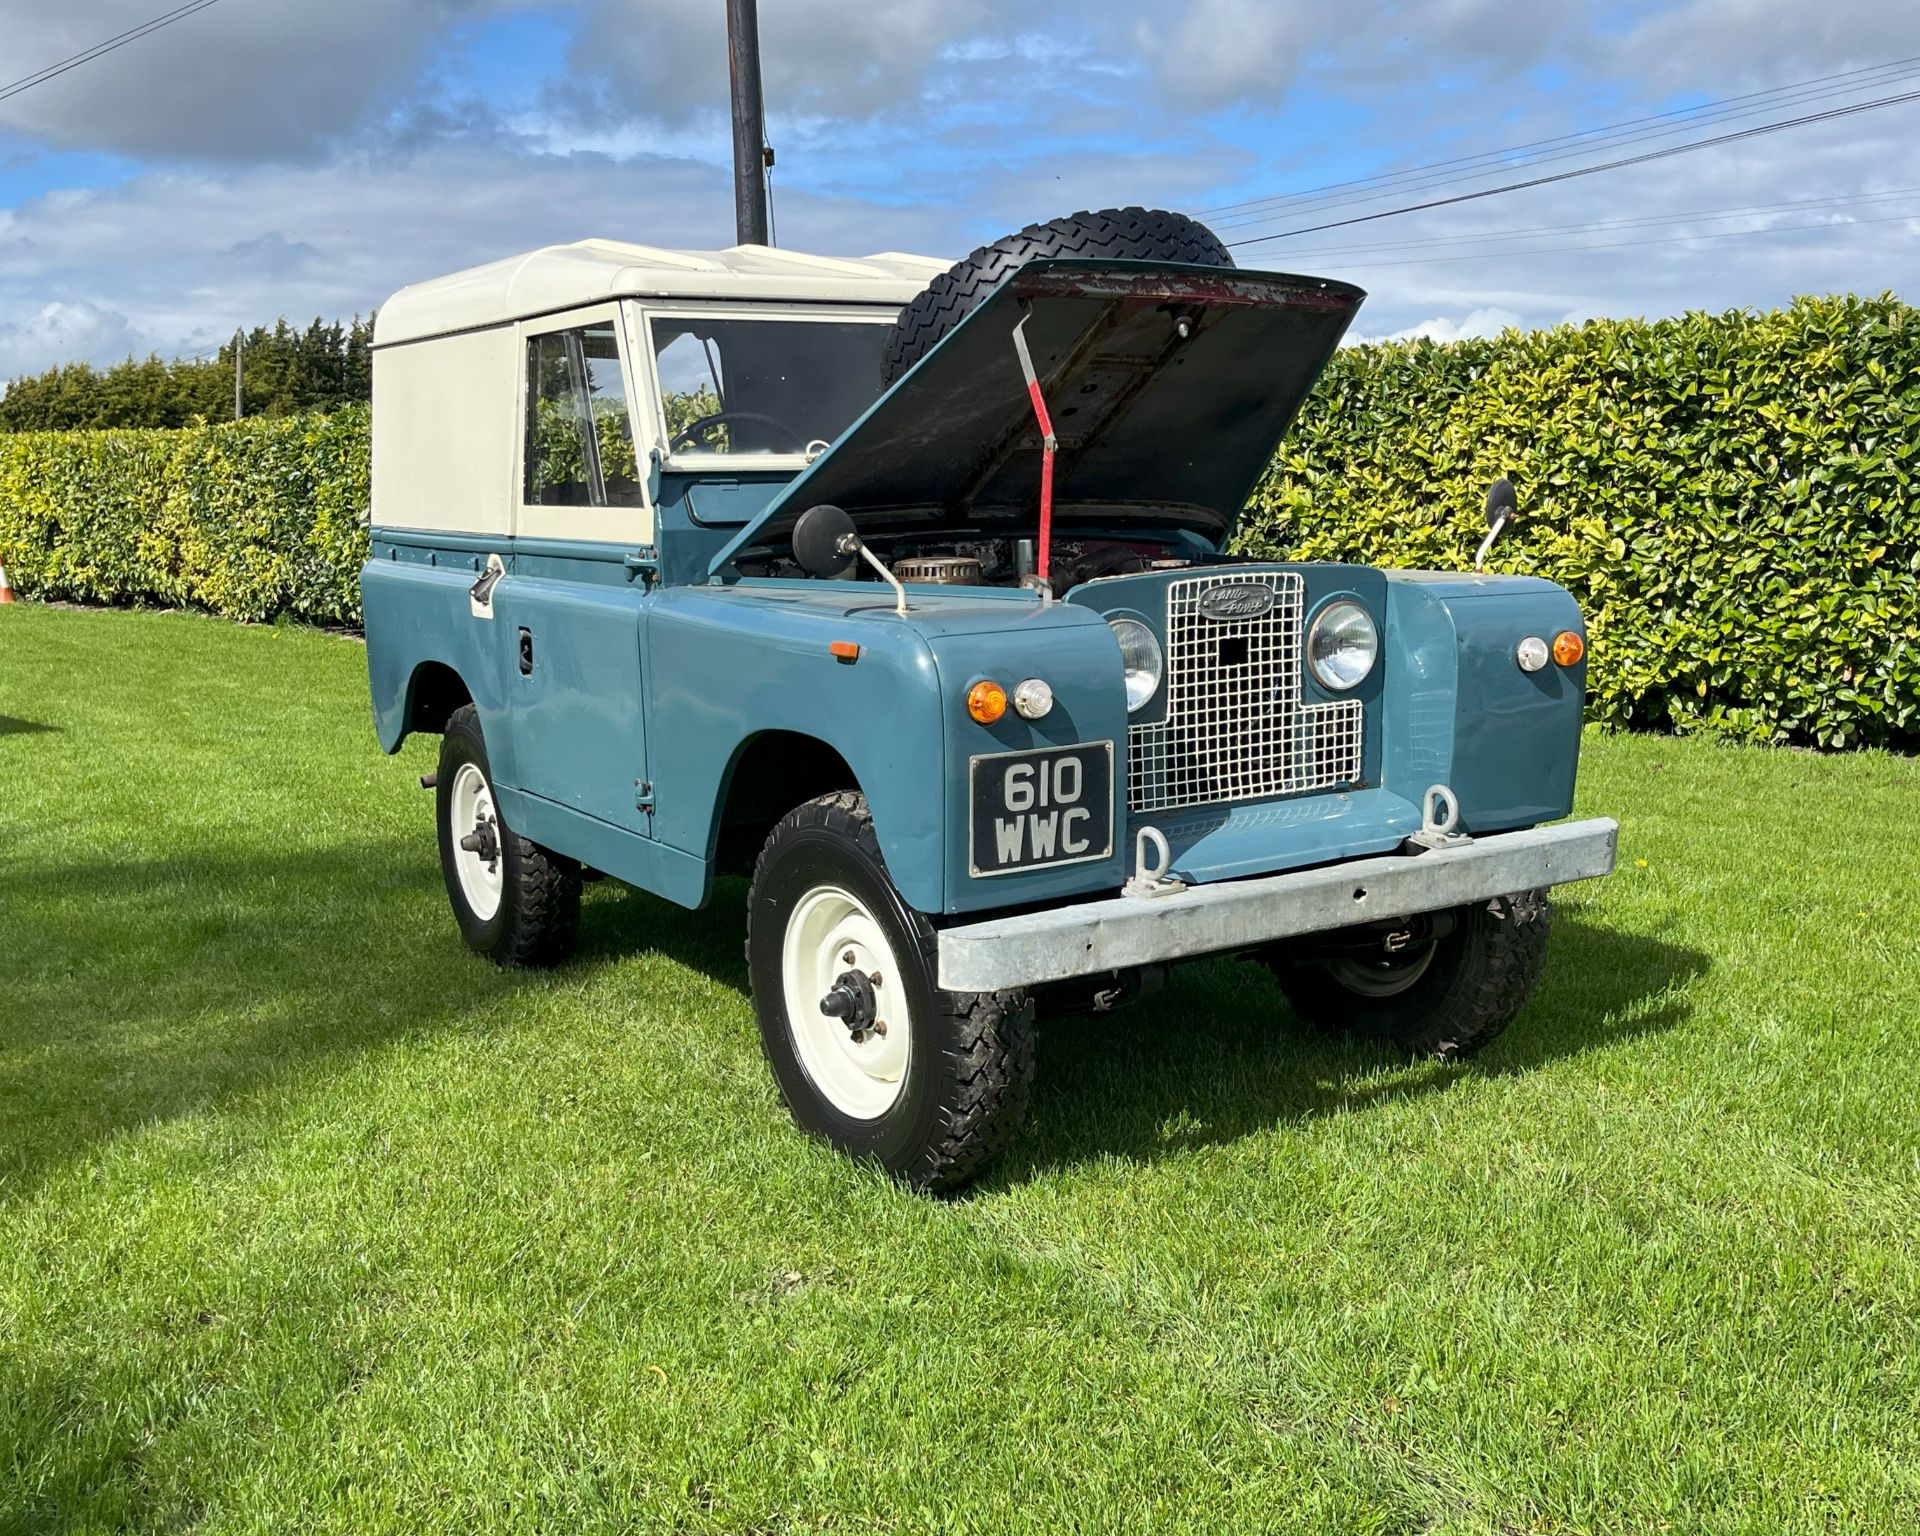 1962 Land Rover 88 Series II, petrol 2.25 litre engine, blue with 64,078 showing on the milometer, - Image 2 of 14